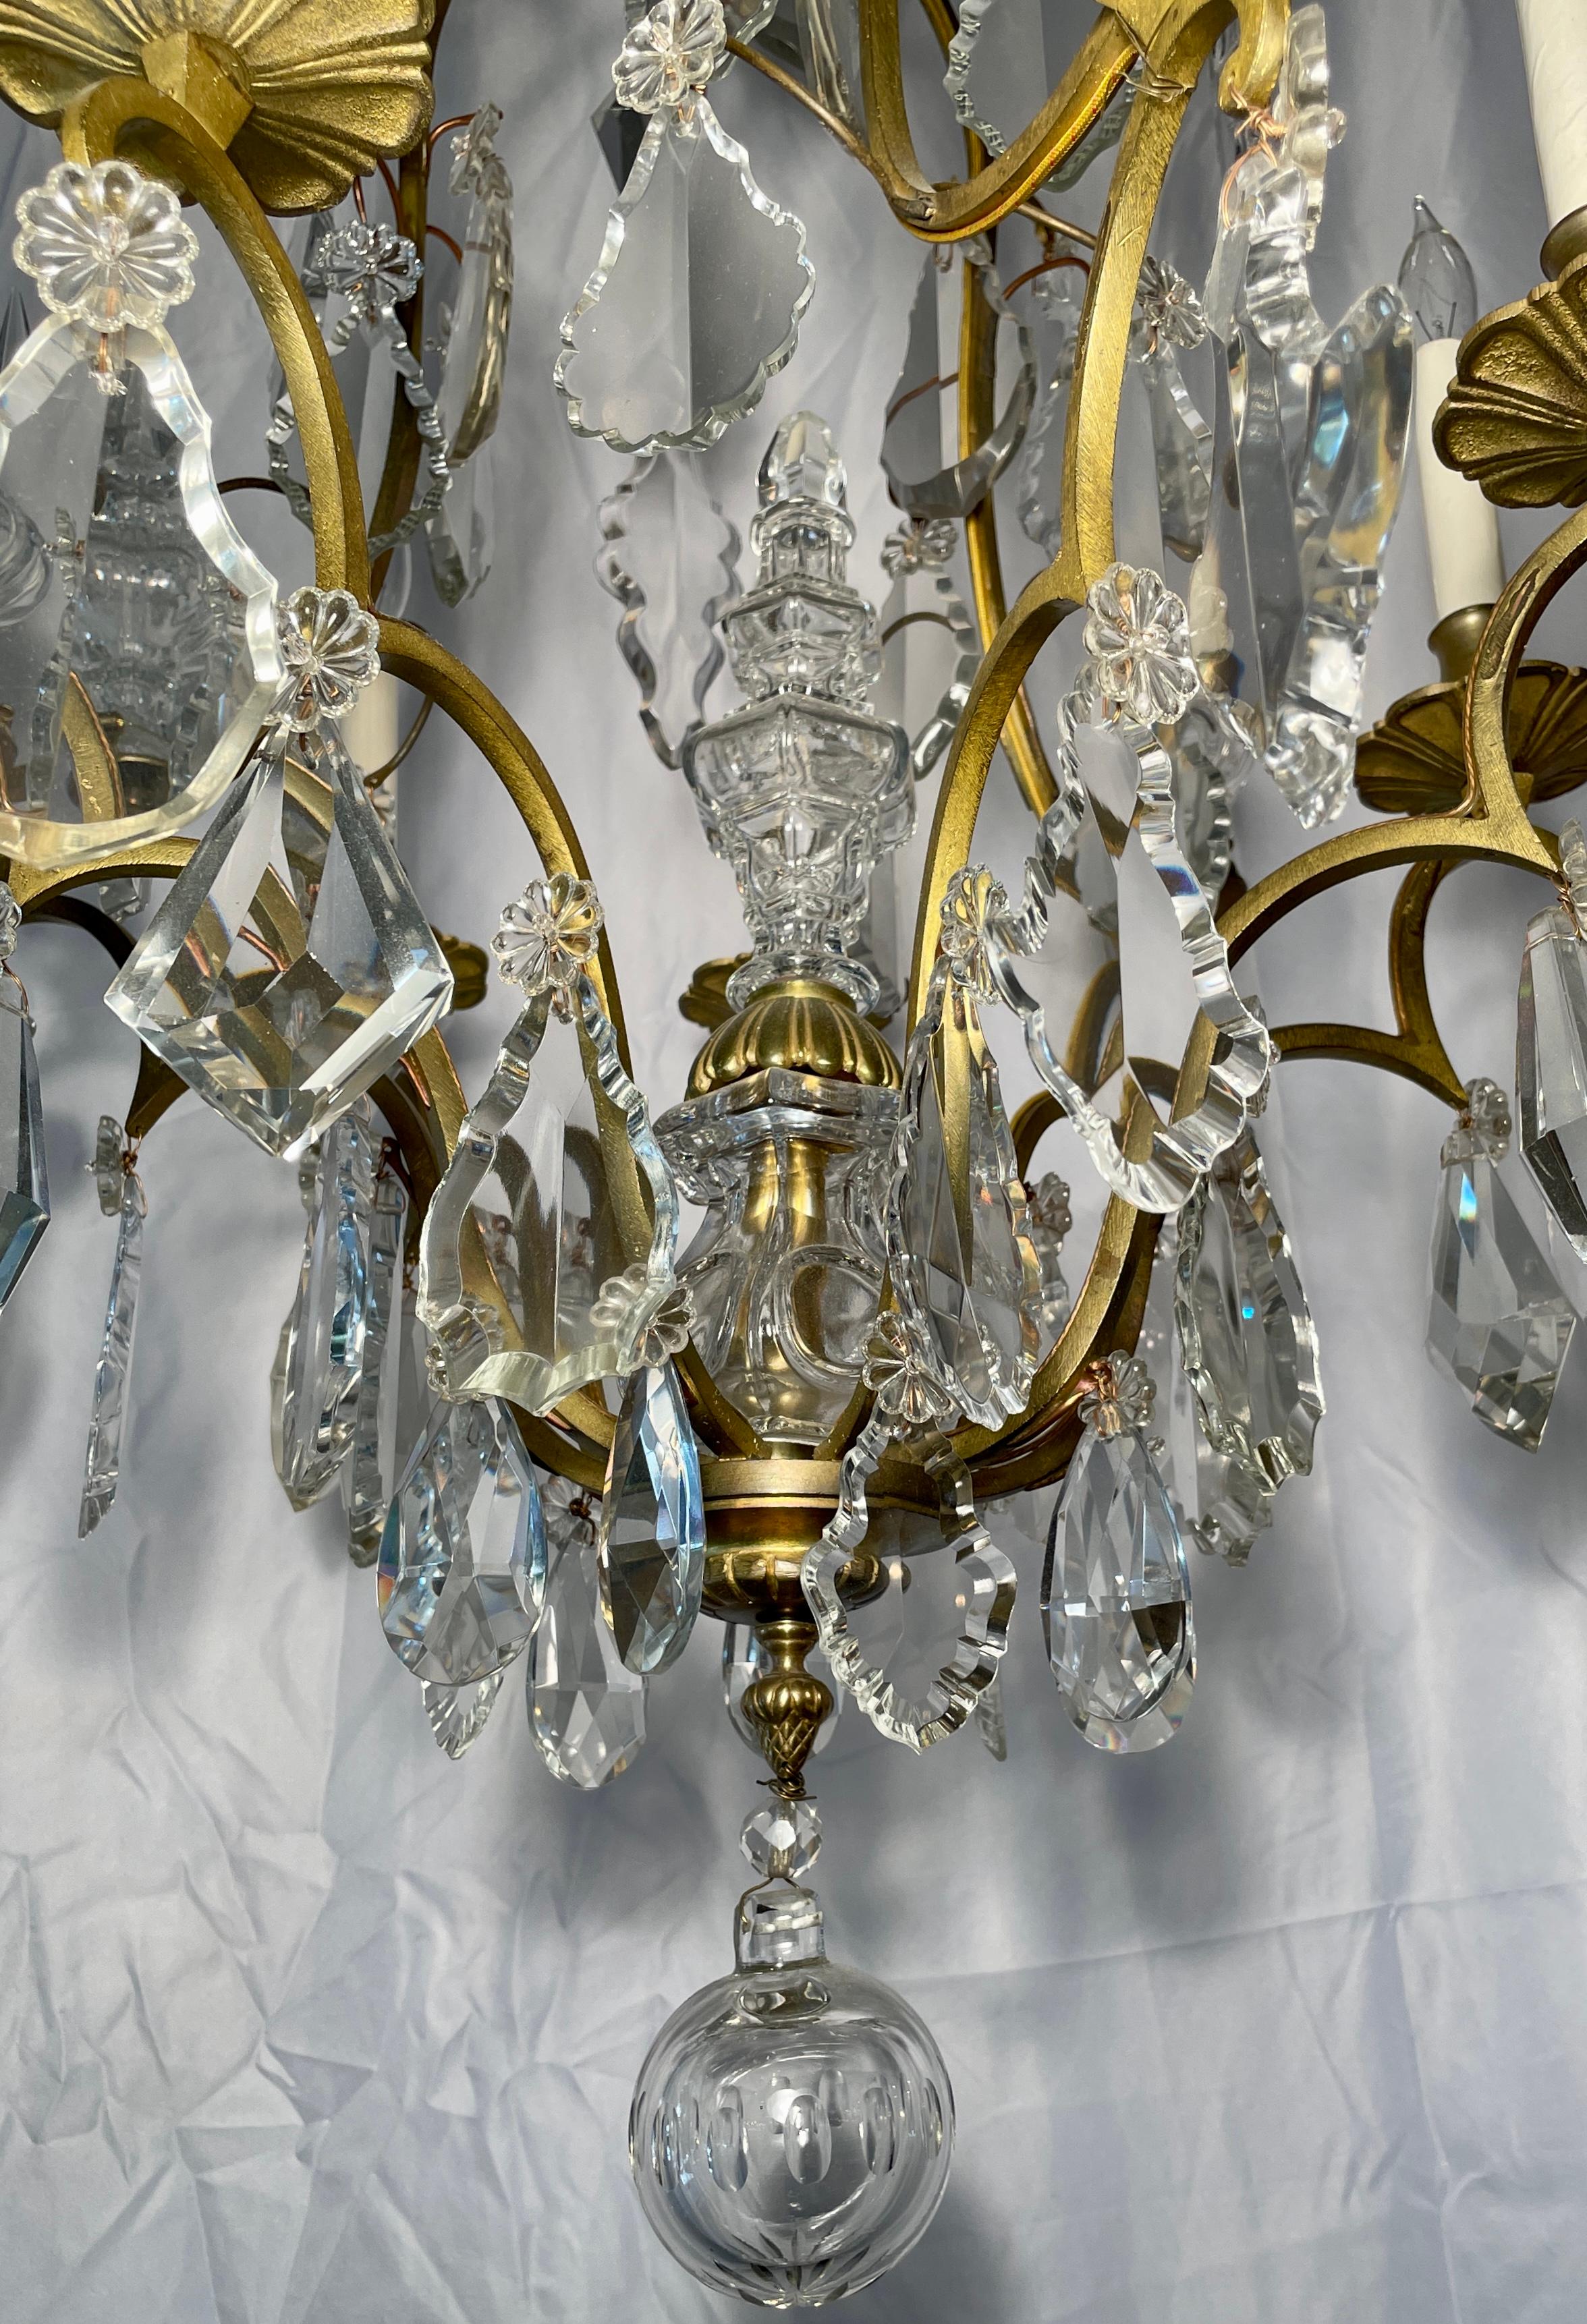 19th Century Antique French Baccarat Crystal and Bronze D' Ore Chandelier, circa 1880-1890 For Sale